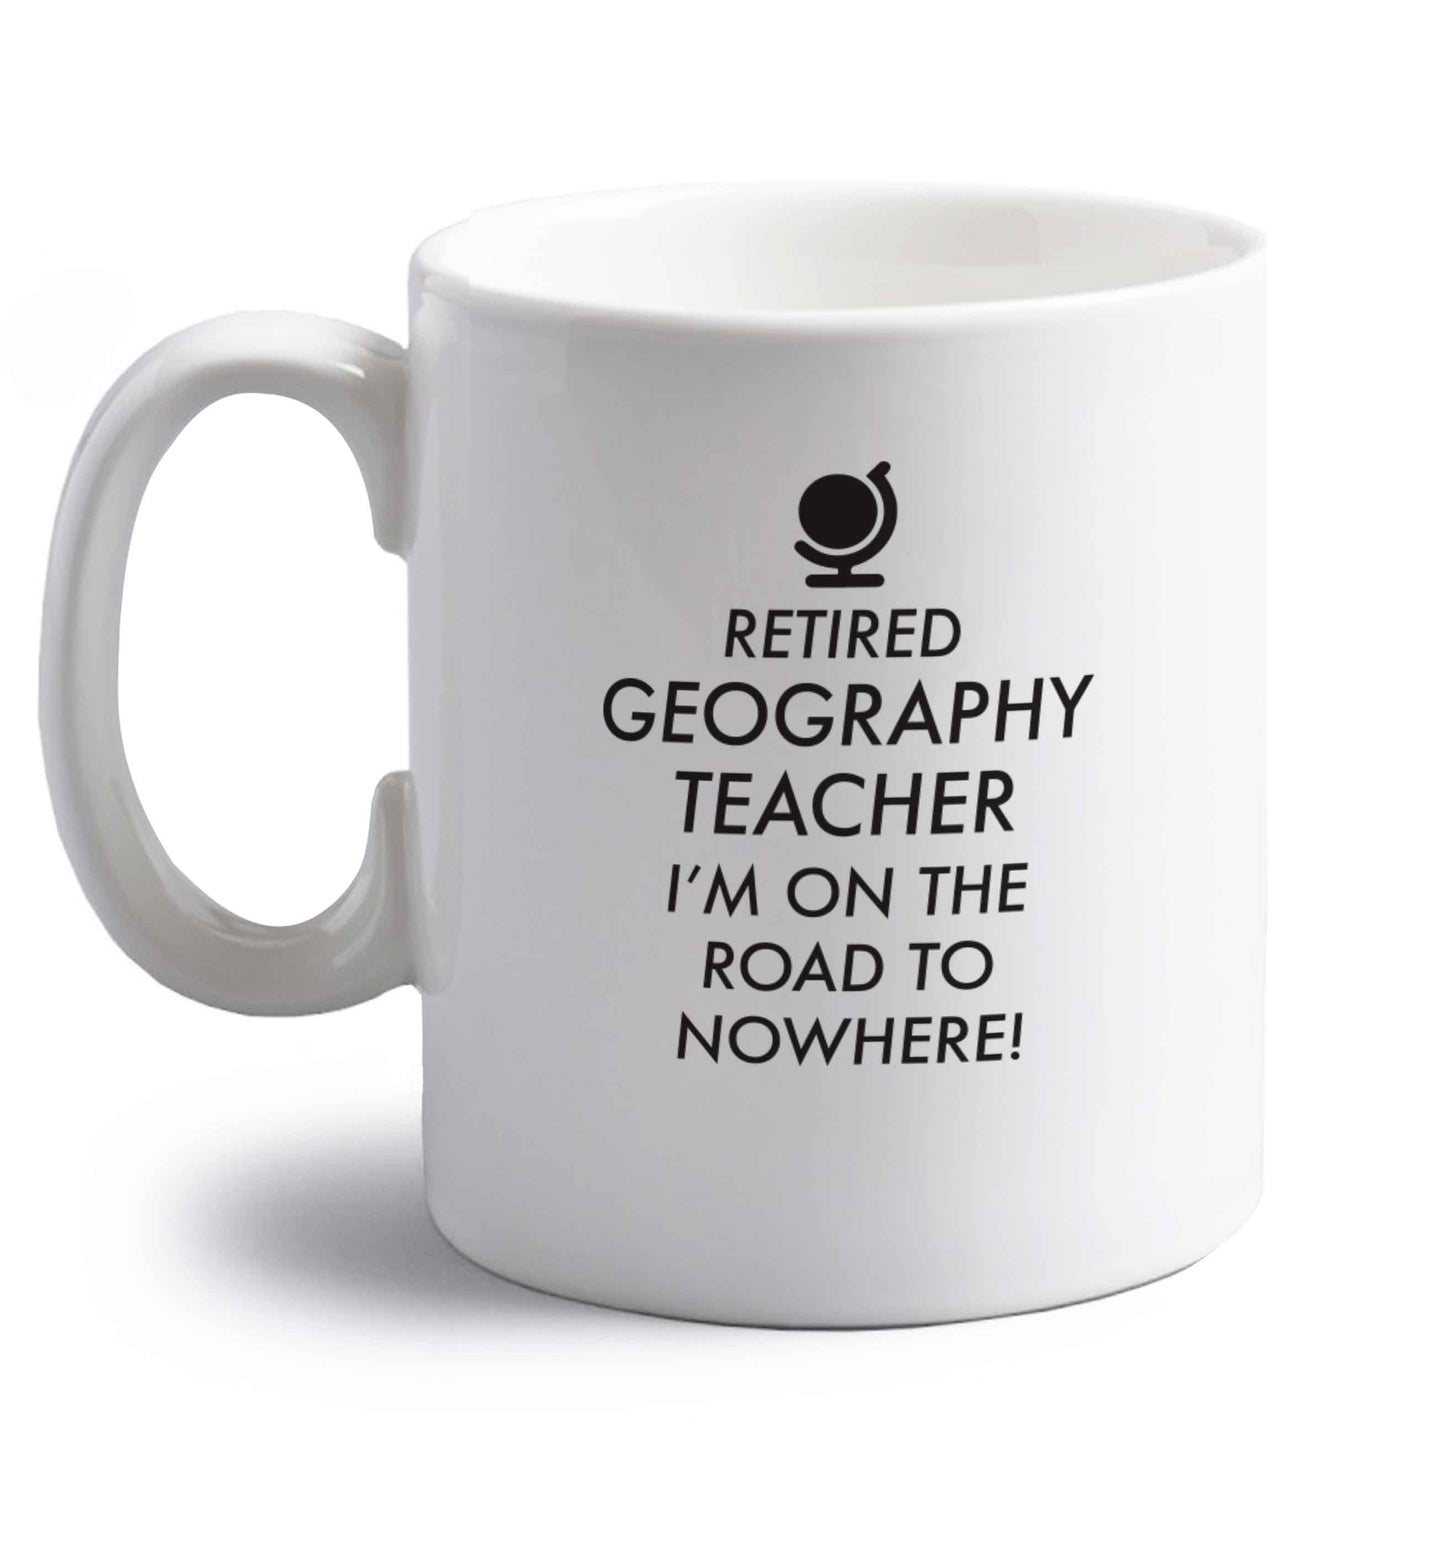 Retired geography teacher I'm on the road to nowhere right handed white ceramic mug 